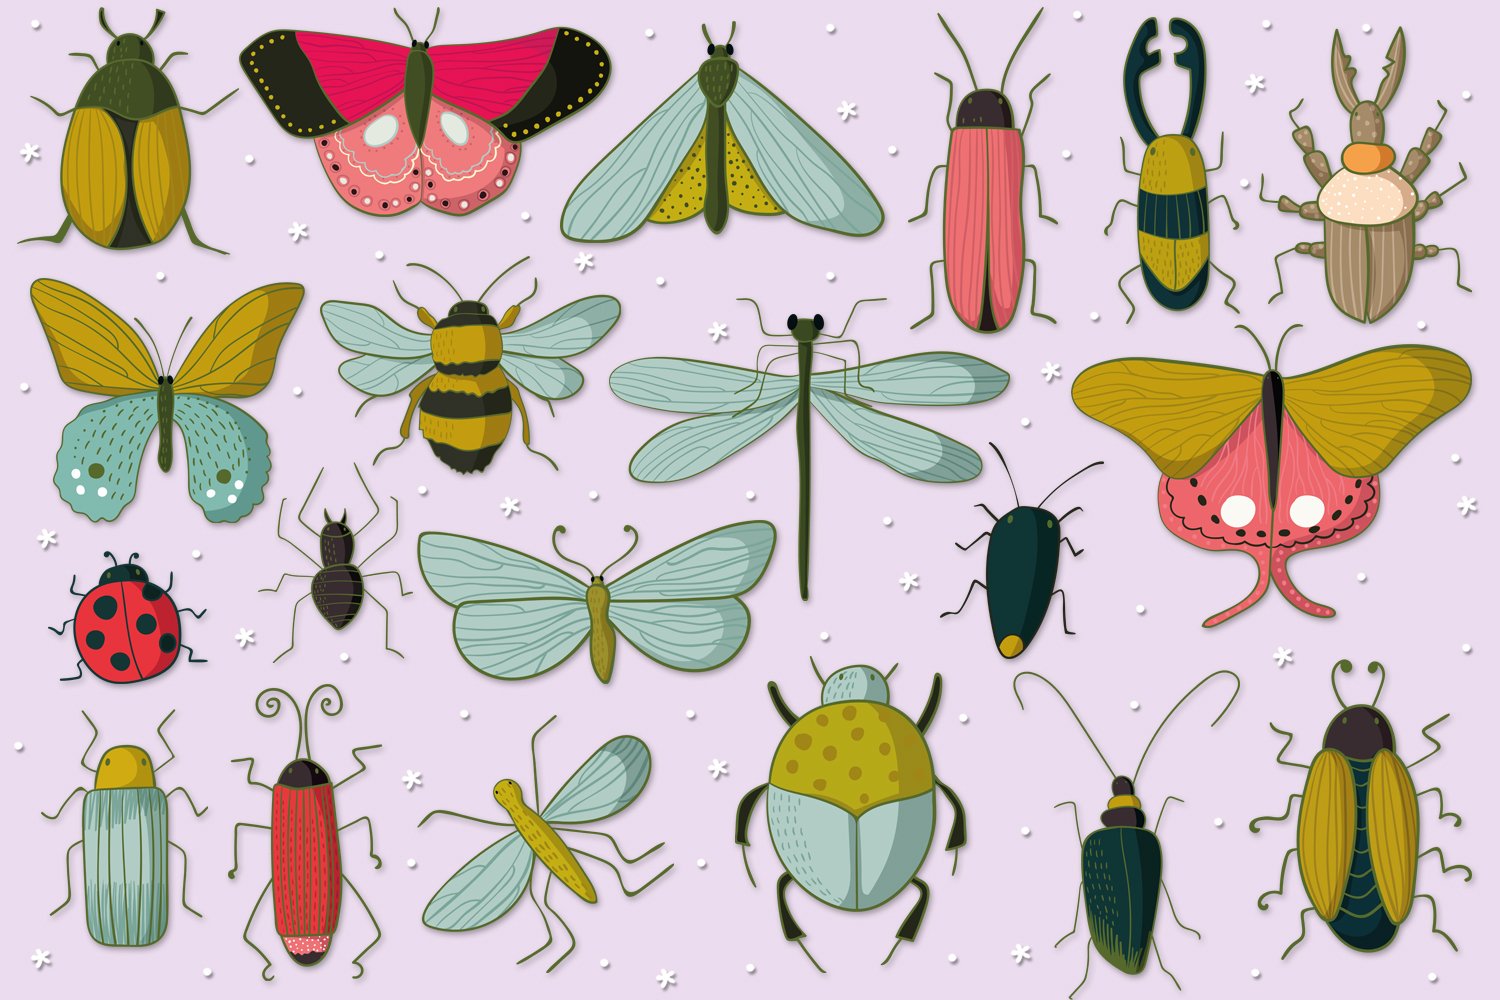 Insects and Bugs preview image.